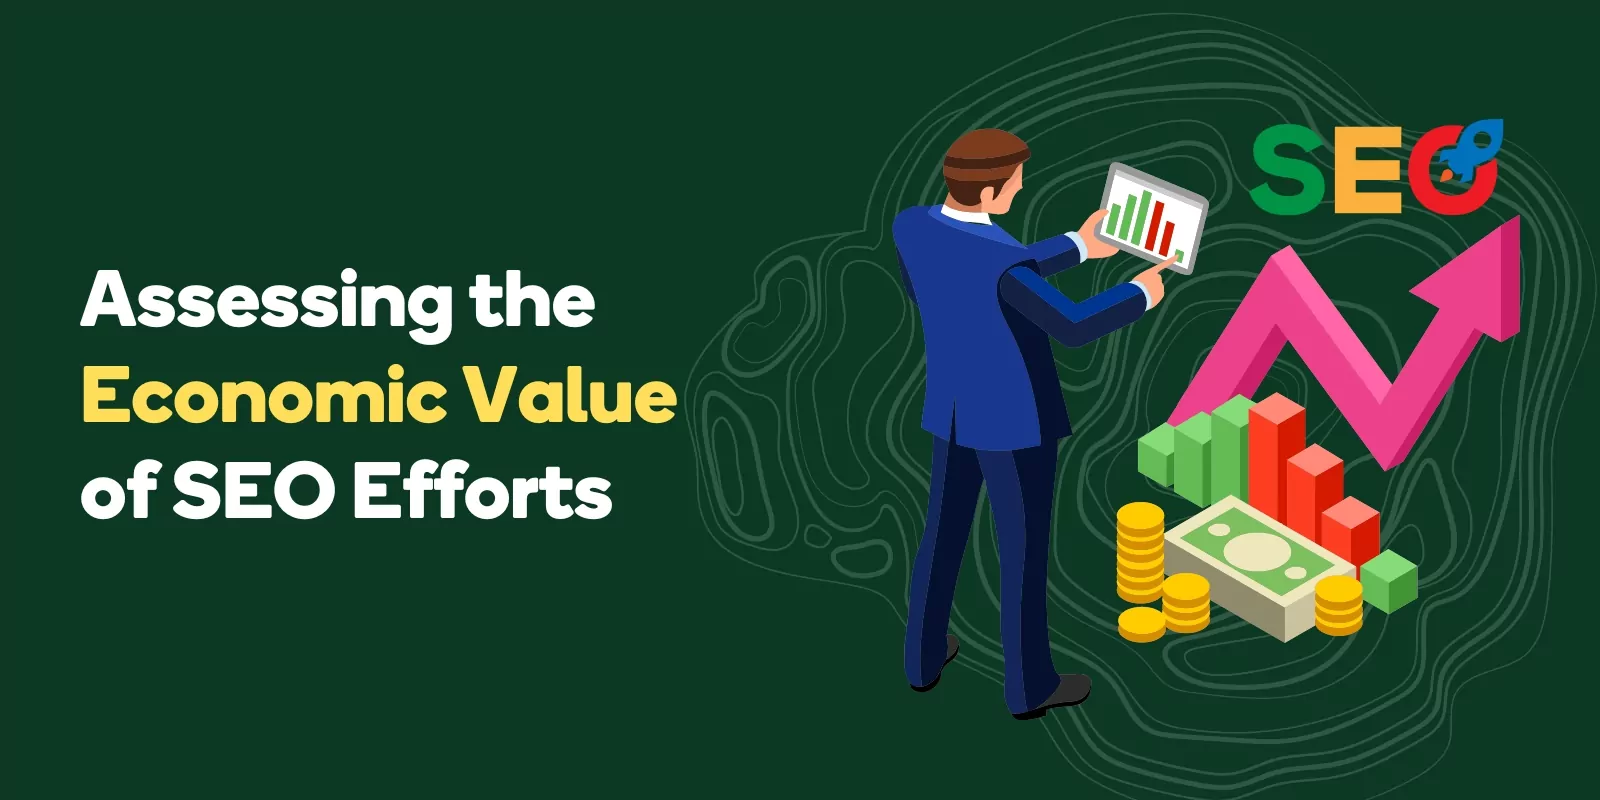 Assessing the Economic Value of SEO Efforts